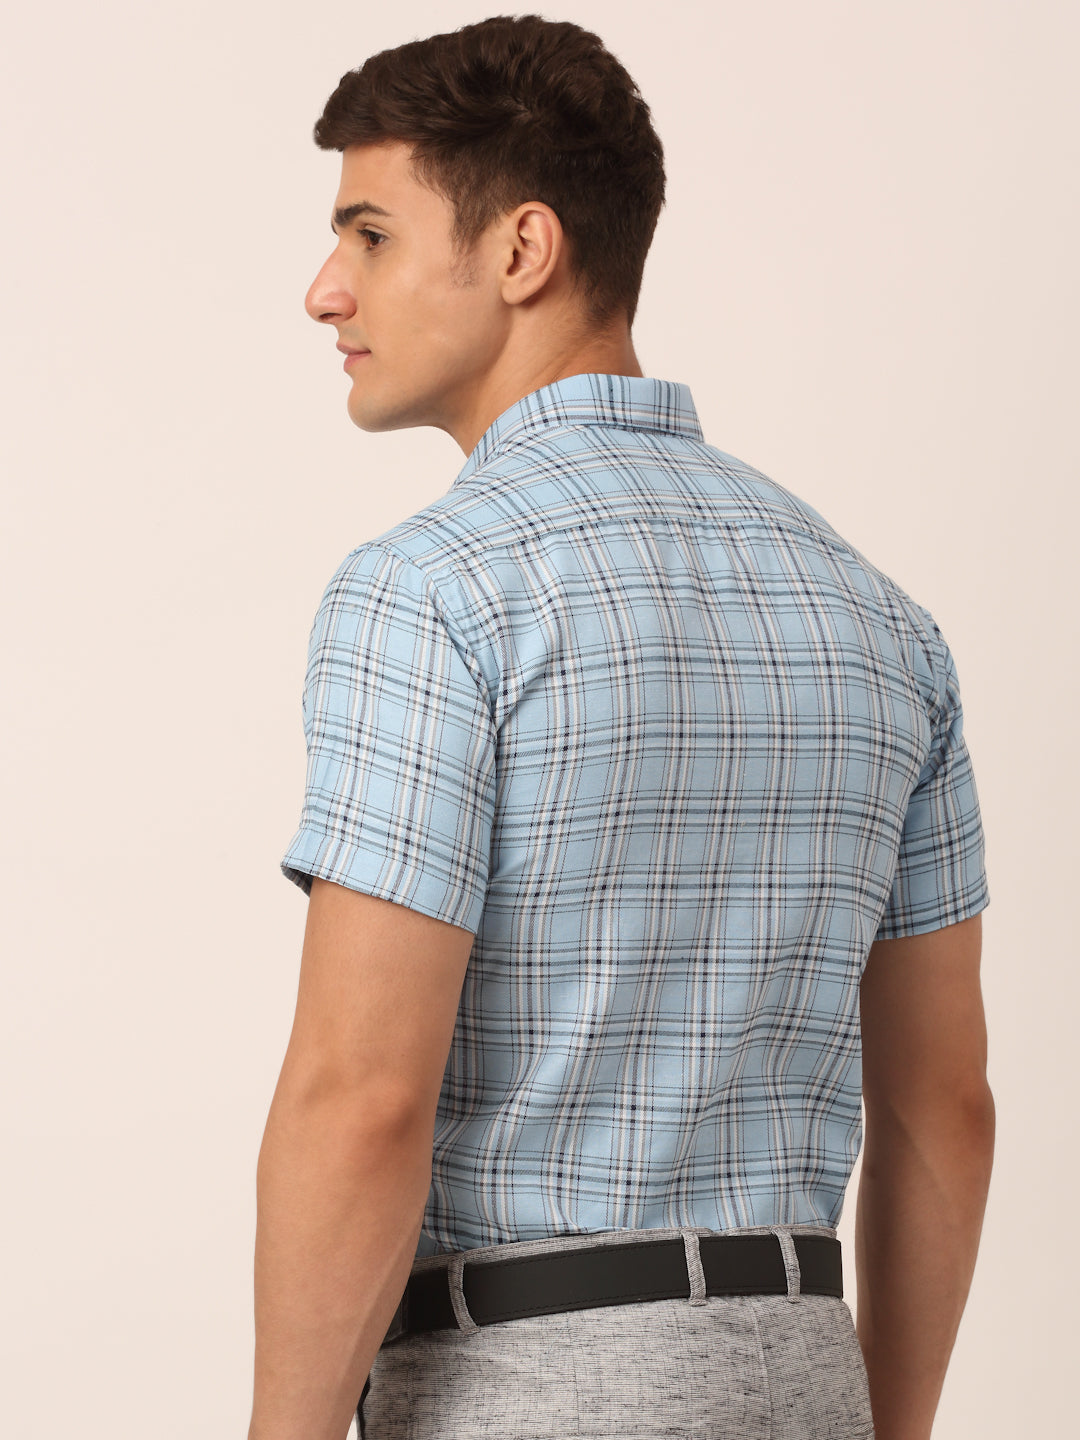 Men's Cotton Checked Half Sleeves Formal Shirts ( SF 815Sky )